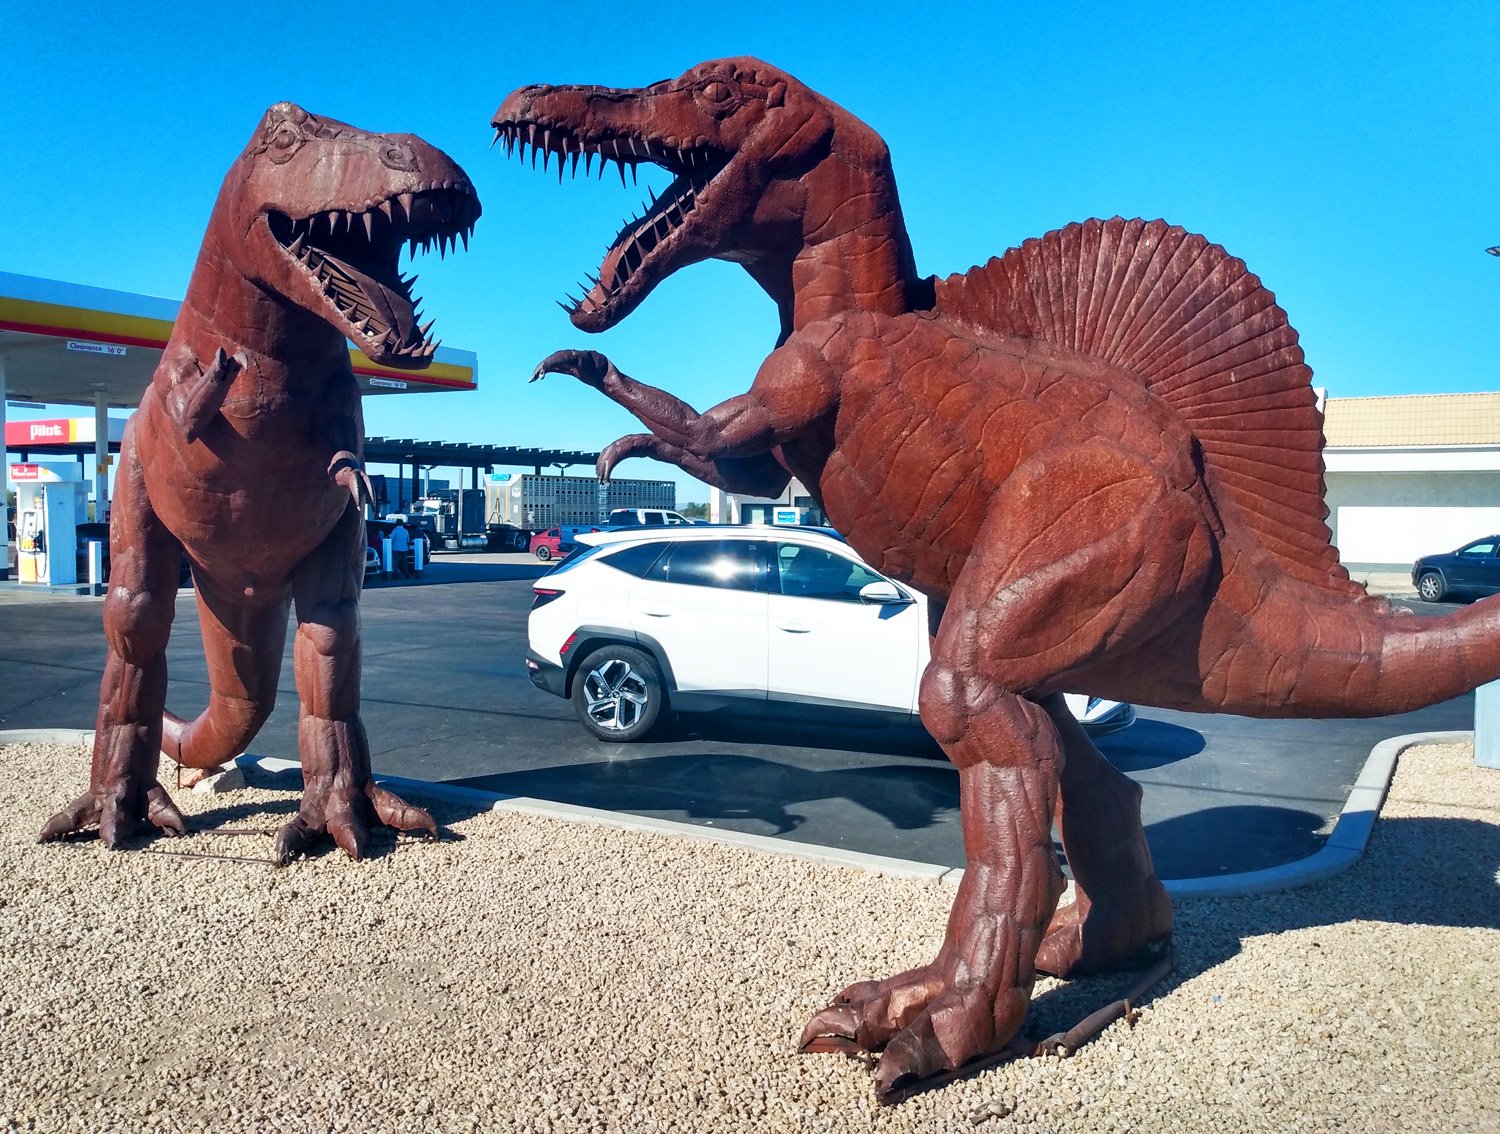 These are very dope. There's a definite trend of roadside dinosaurs in the world.